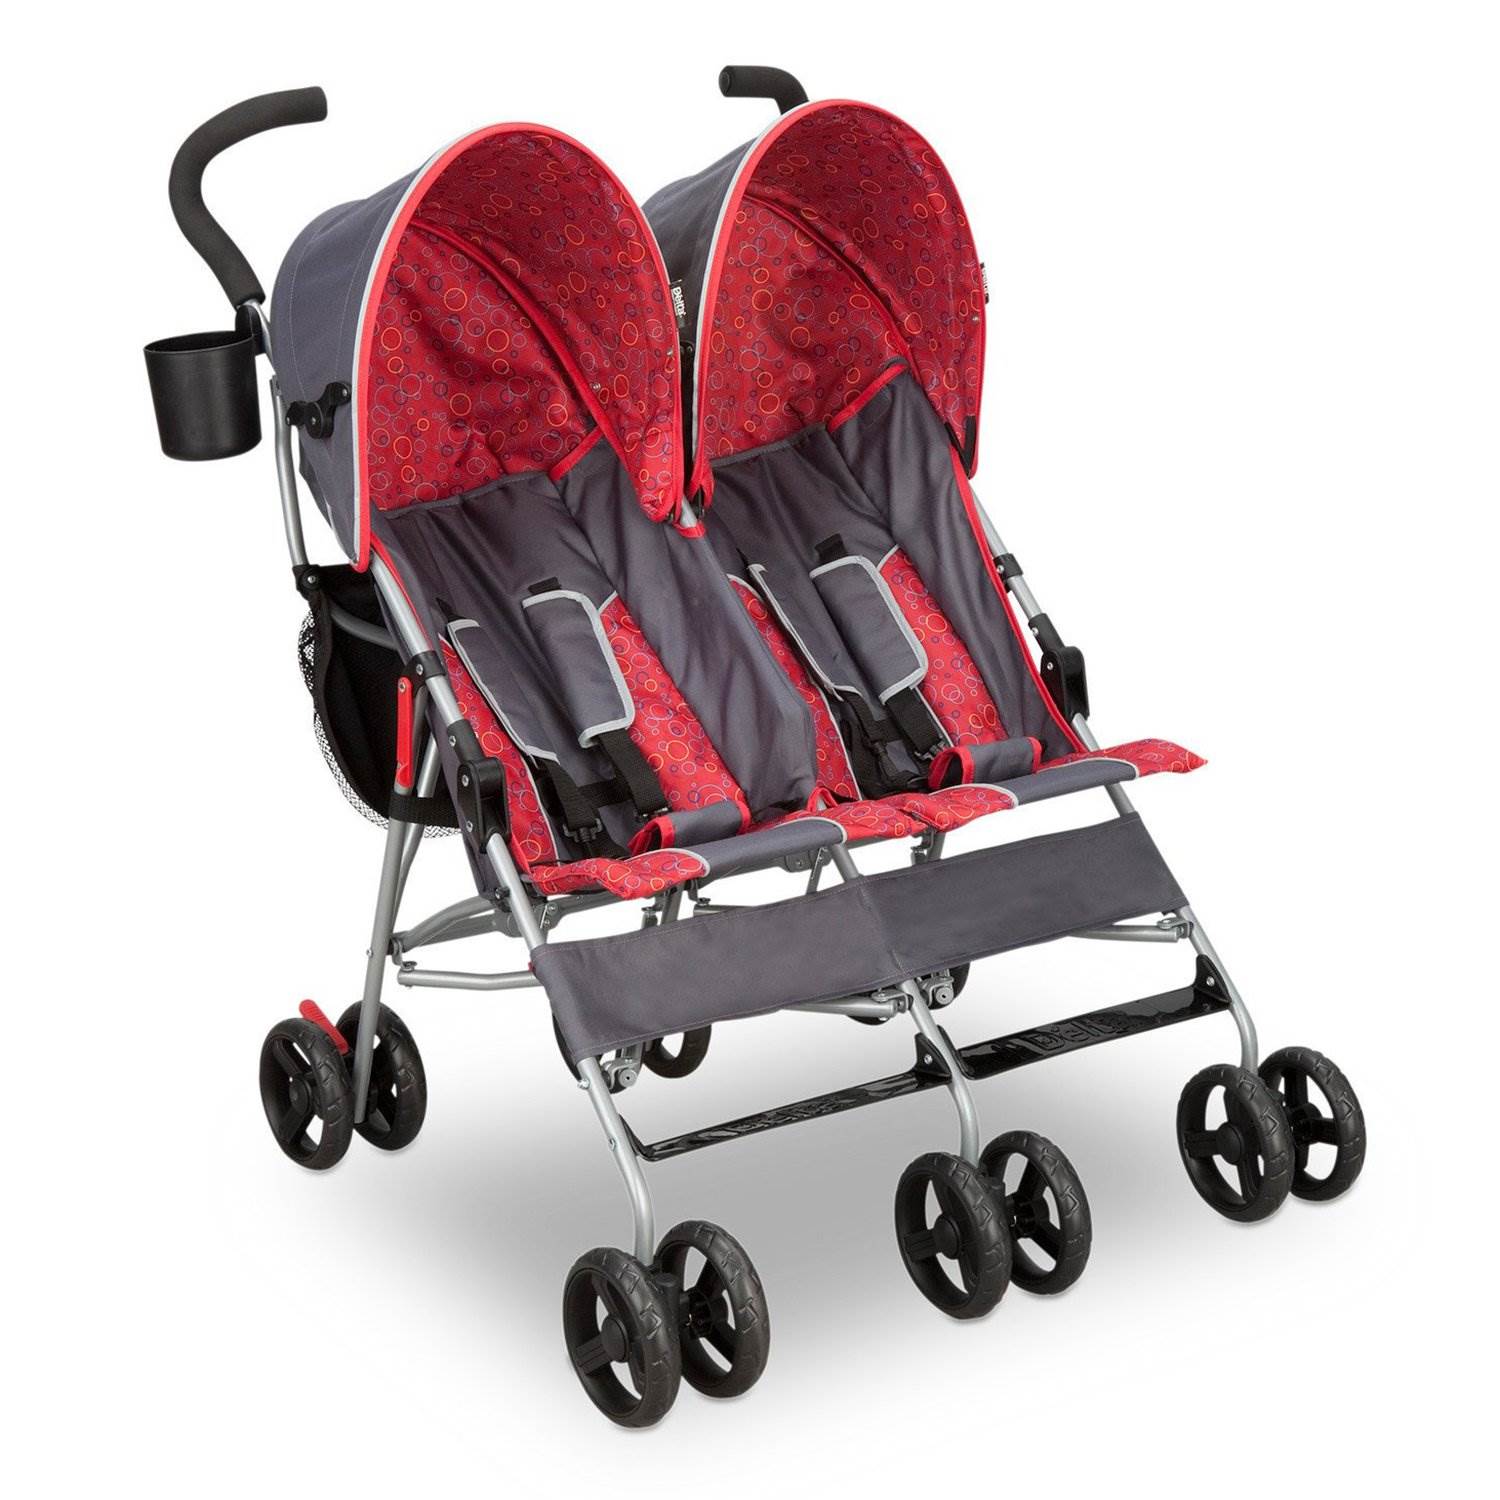 Delta Children LX 35 Pound Side by Side Double Convenience Stroller, Red & Gray - image 1 of 7